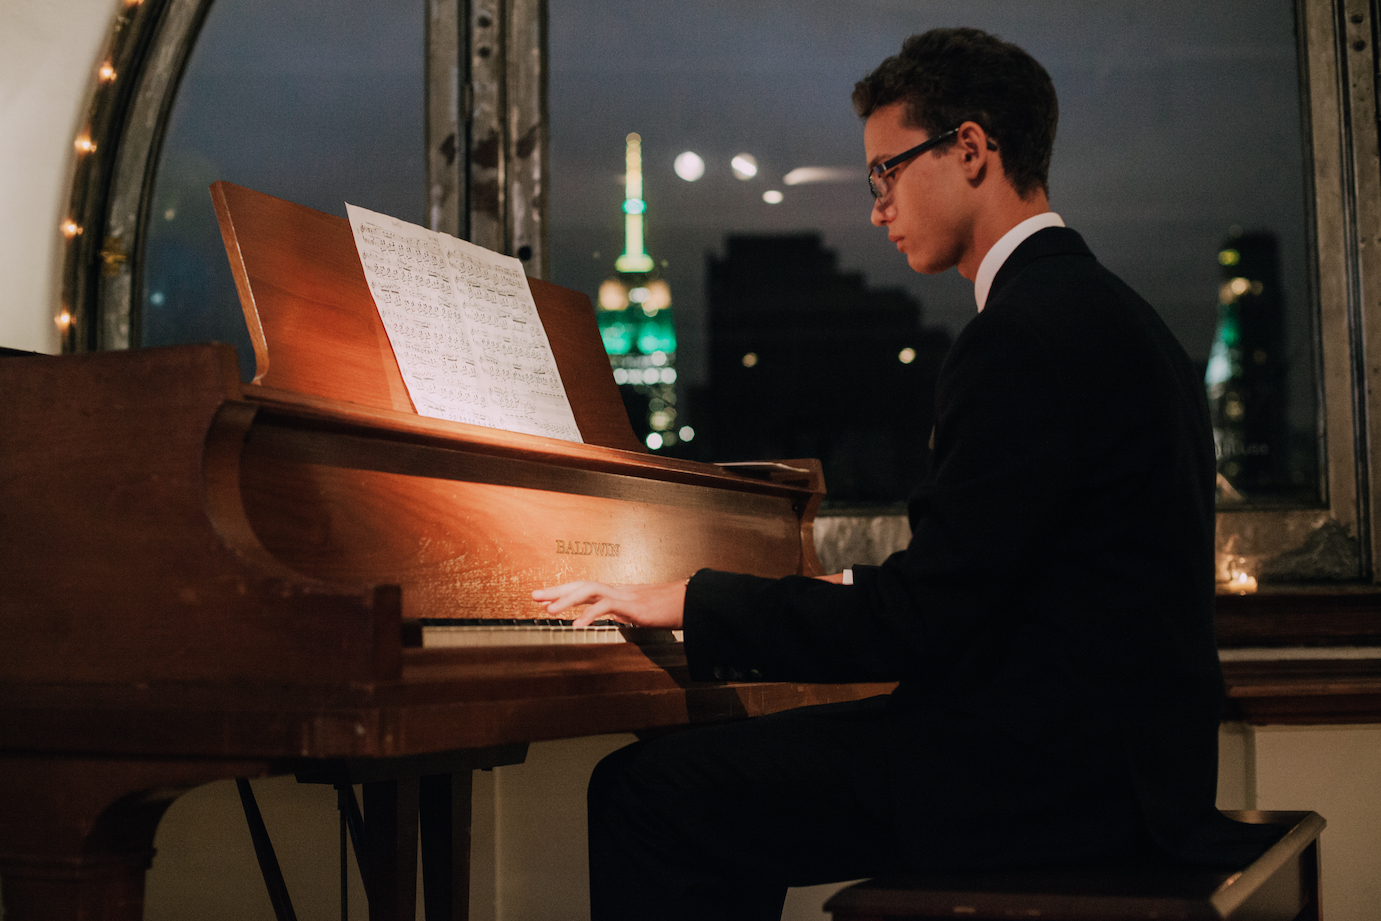 Mihai Stefanescu, a 16-year-old Save One Life beneficiary and award-winning pianist from Romania, performs for guests